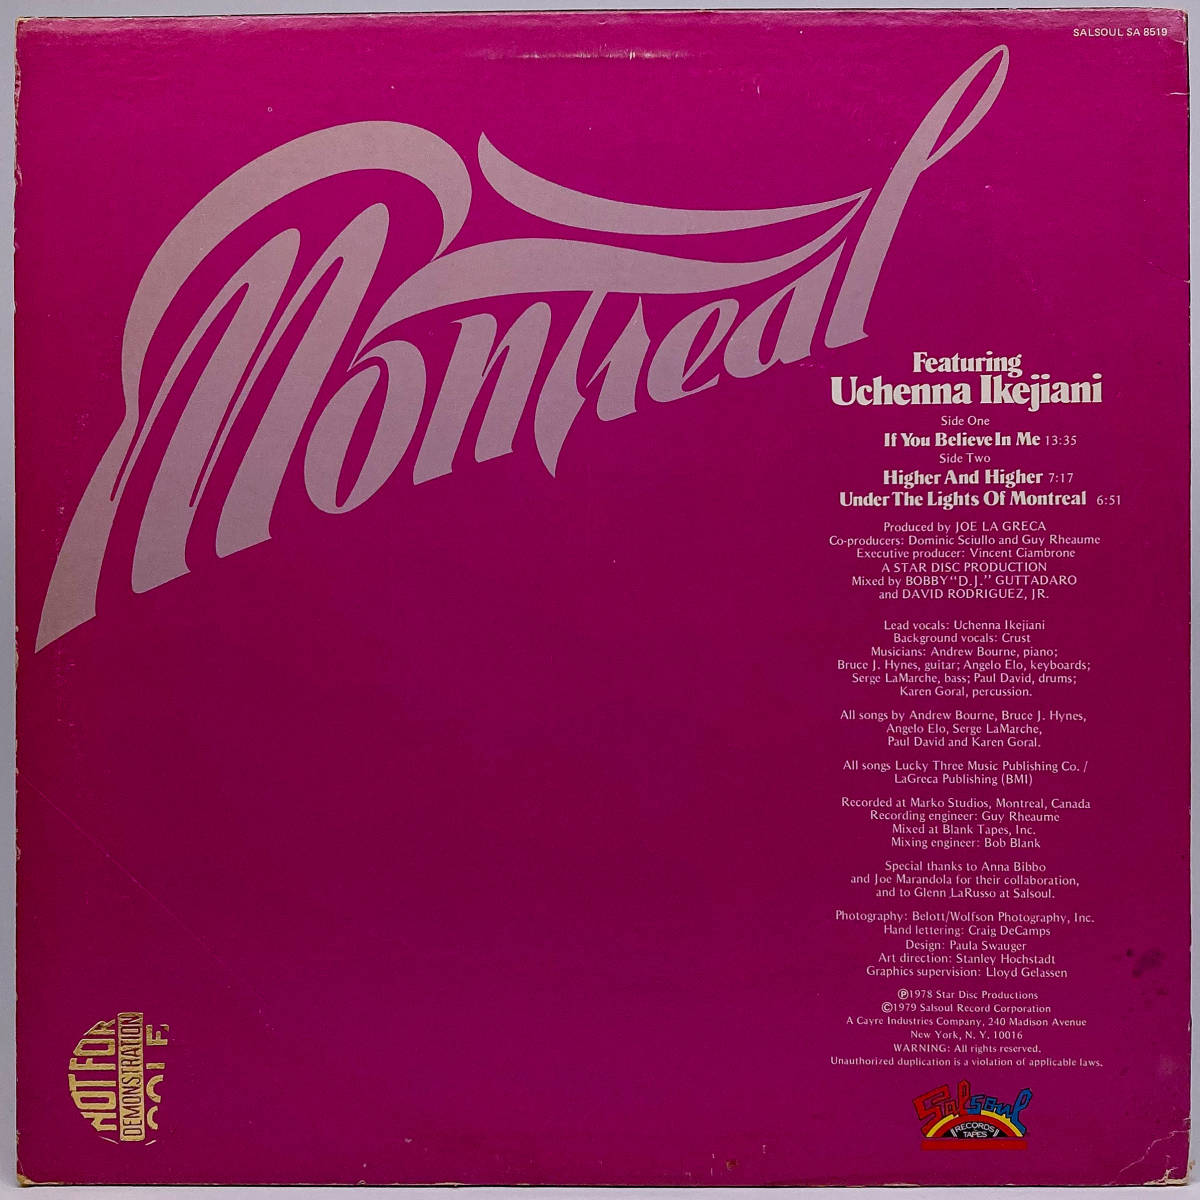 [LP] '79米Orig / Montreal Featuring Uchenna Ikejiani / S.T. / Salsoul Records / SA 8519 / Disco_画像2